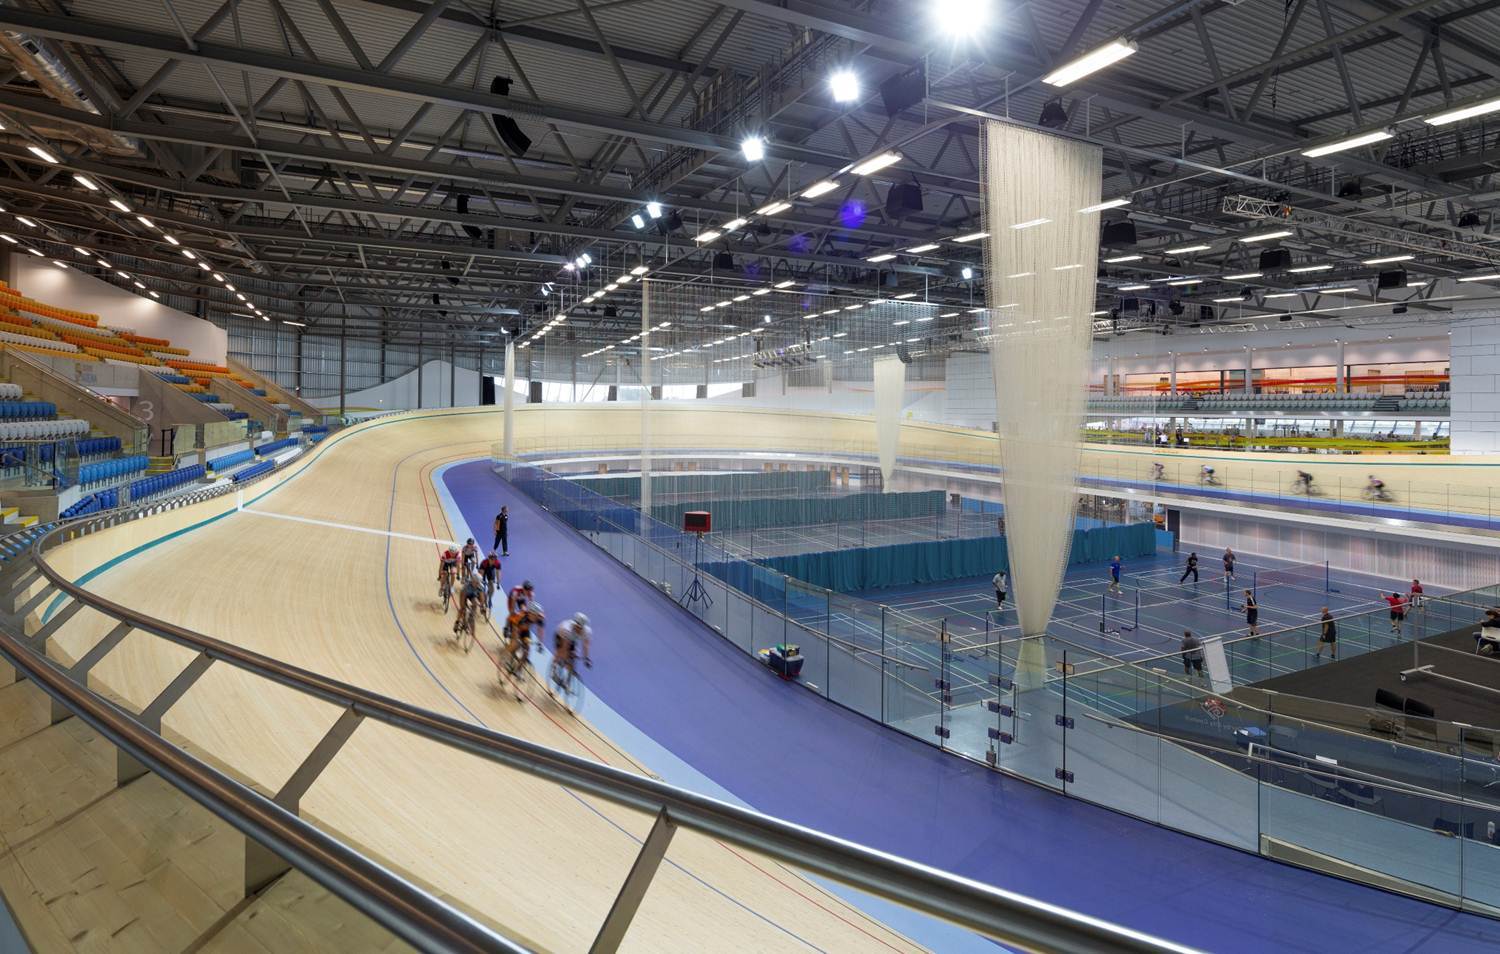 The Inverness velodrome could look this one in Derby